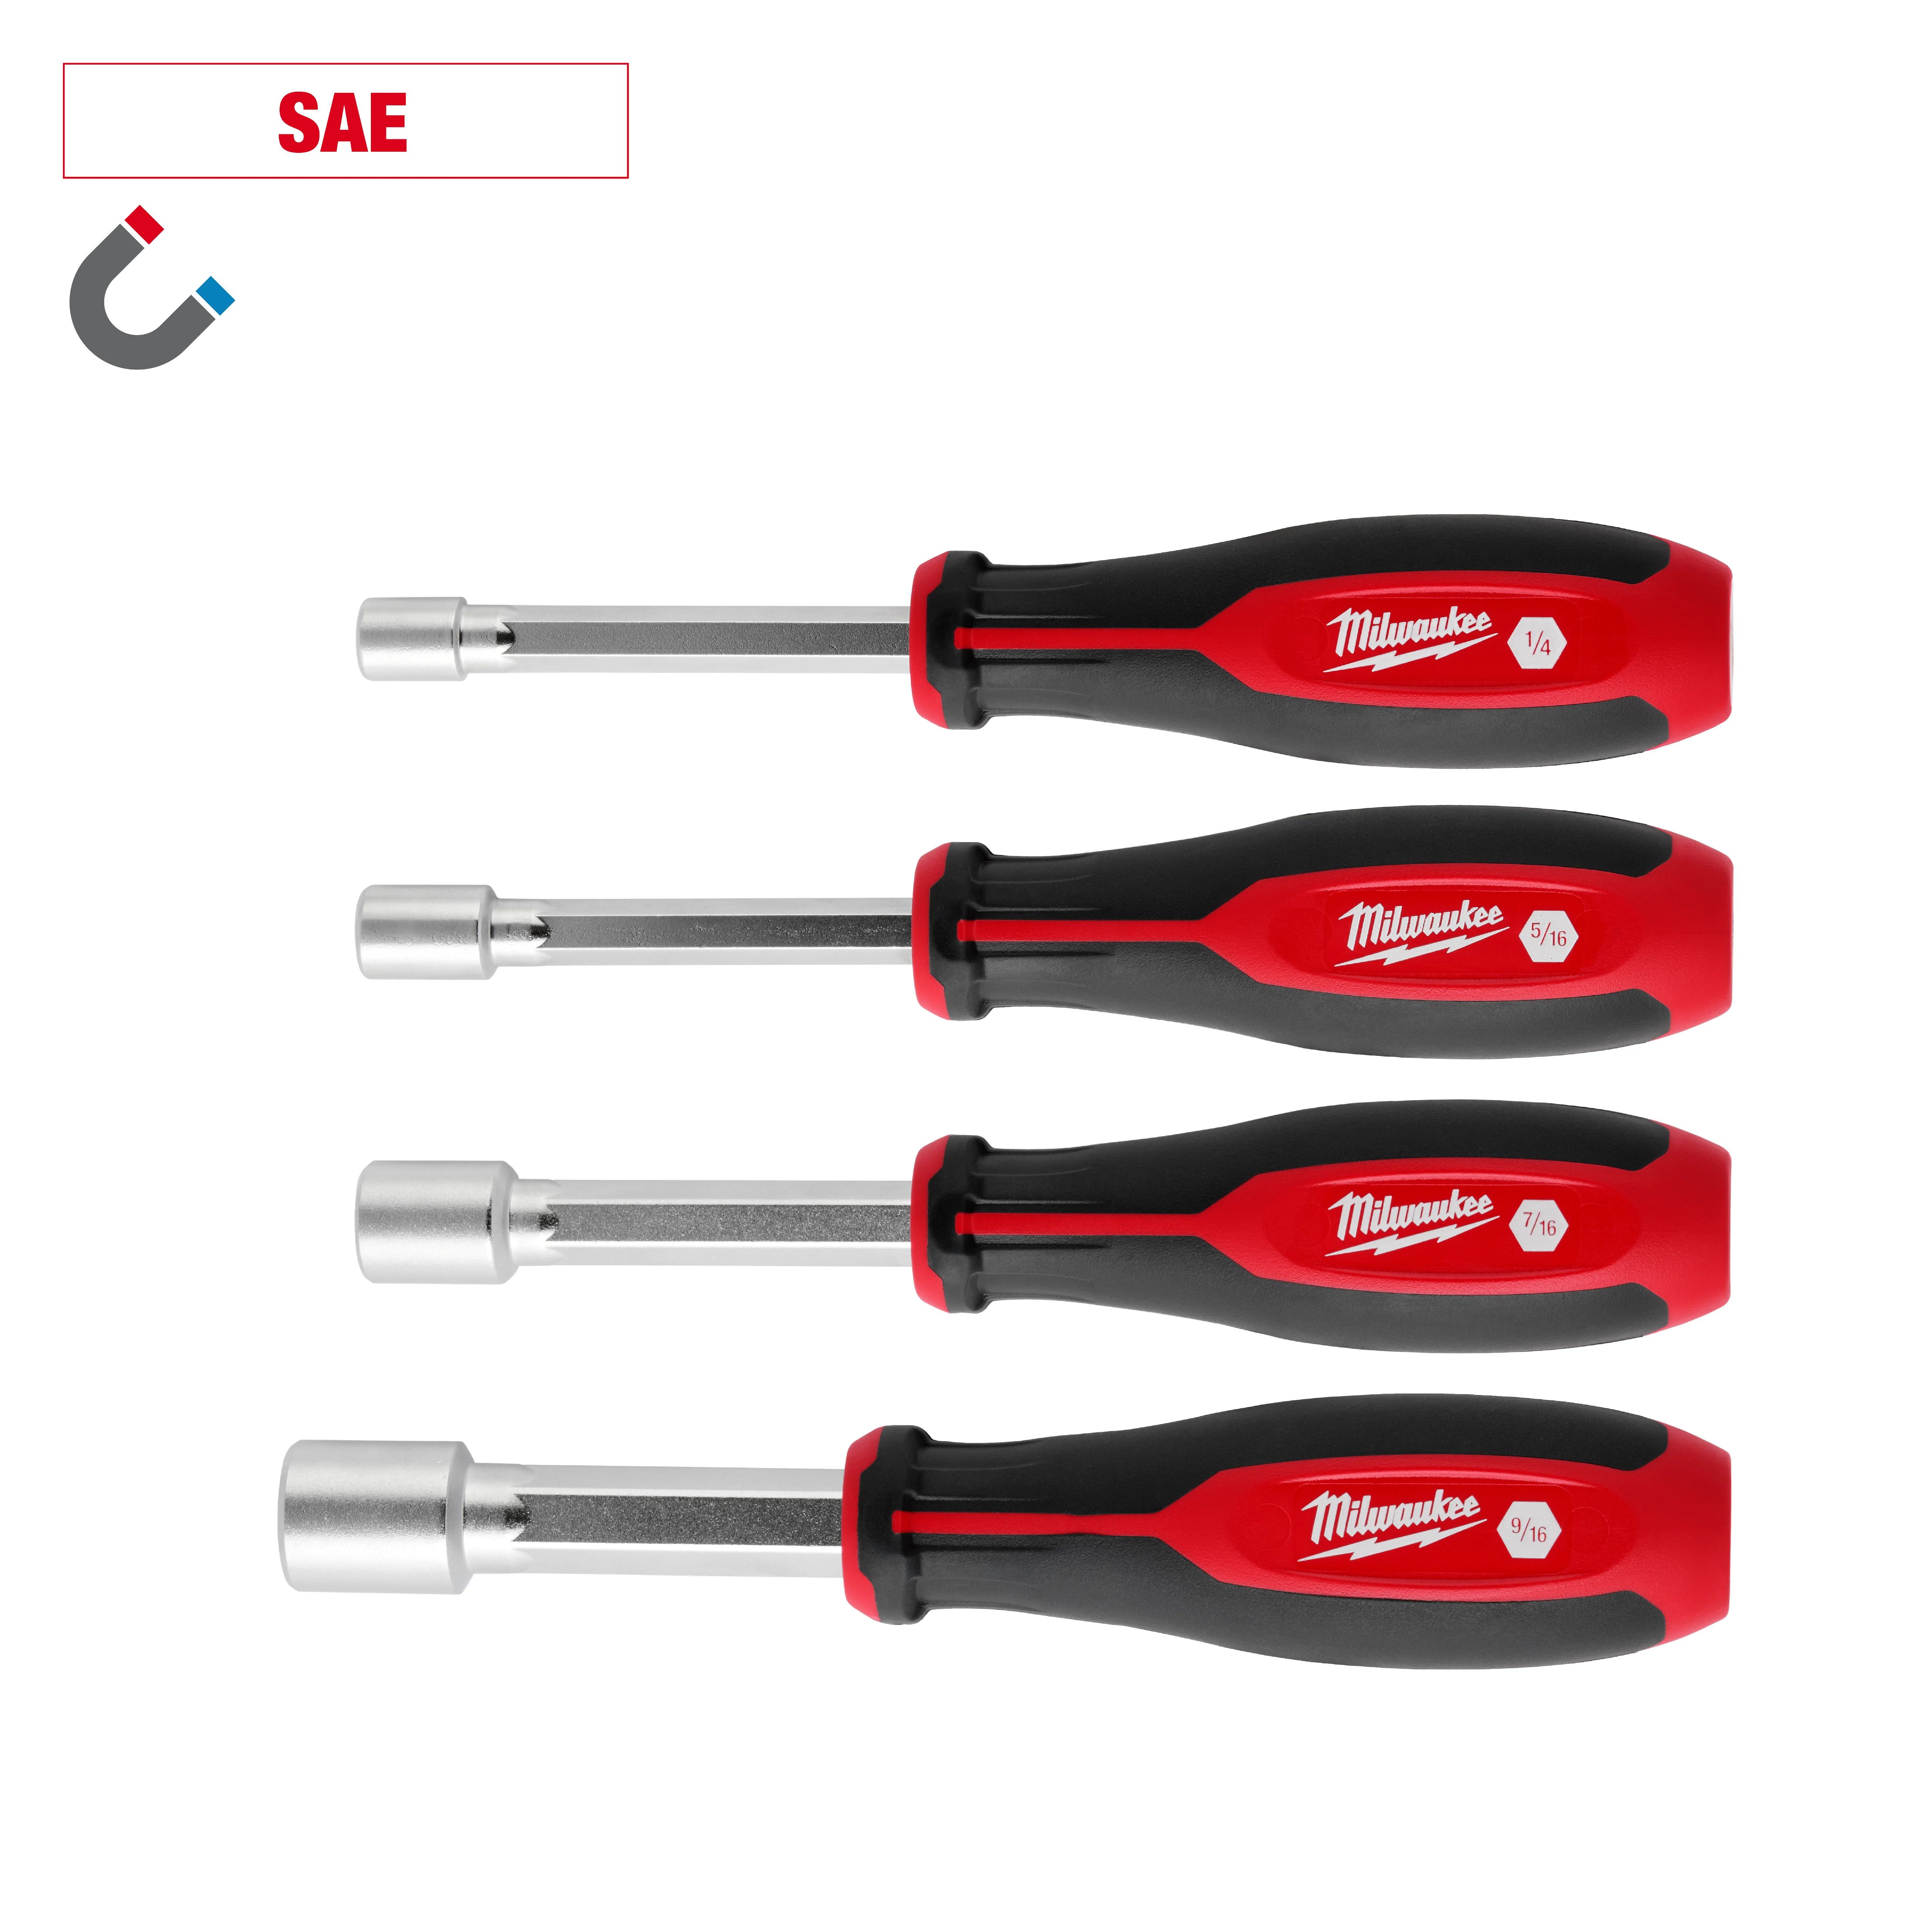 4pc - SAE HOLLOWCORE™ Nut Driver Sets Magnetic